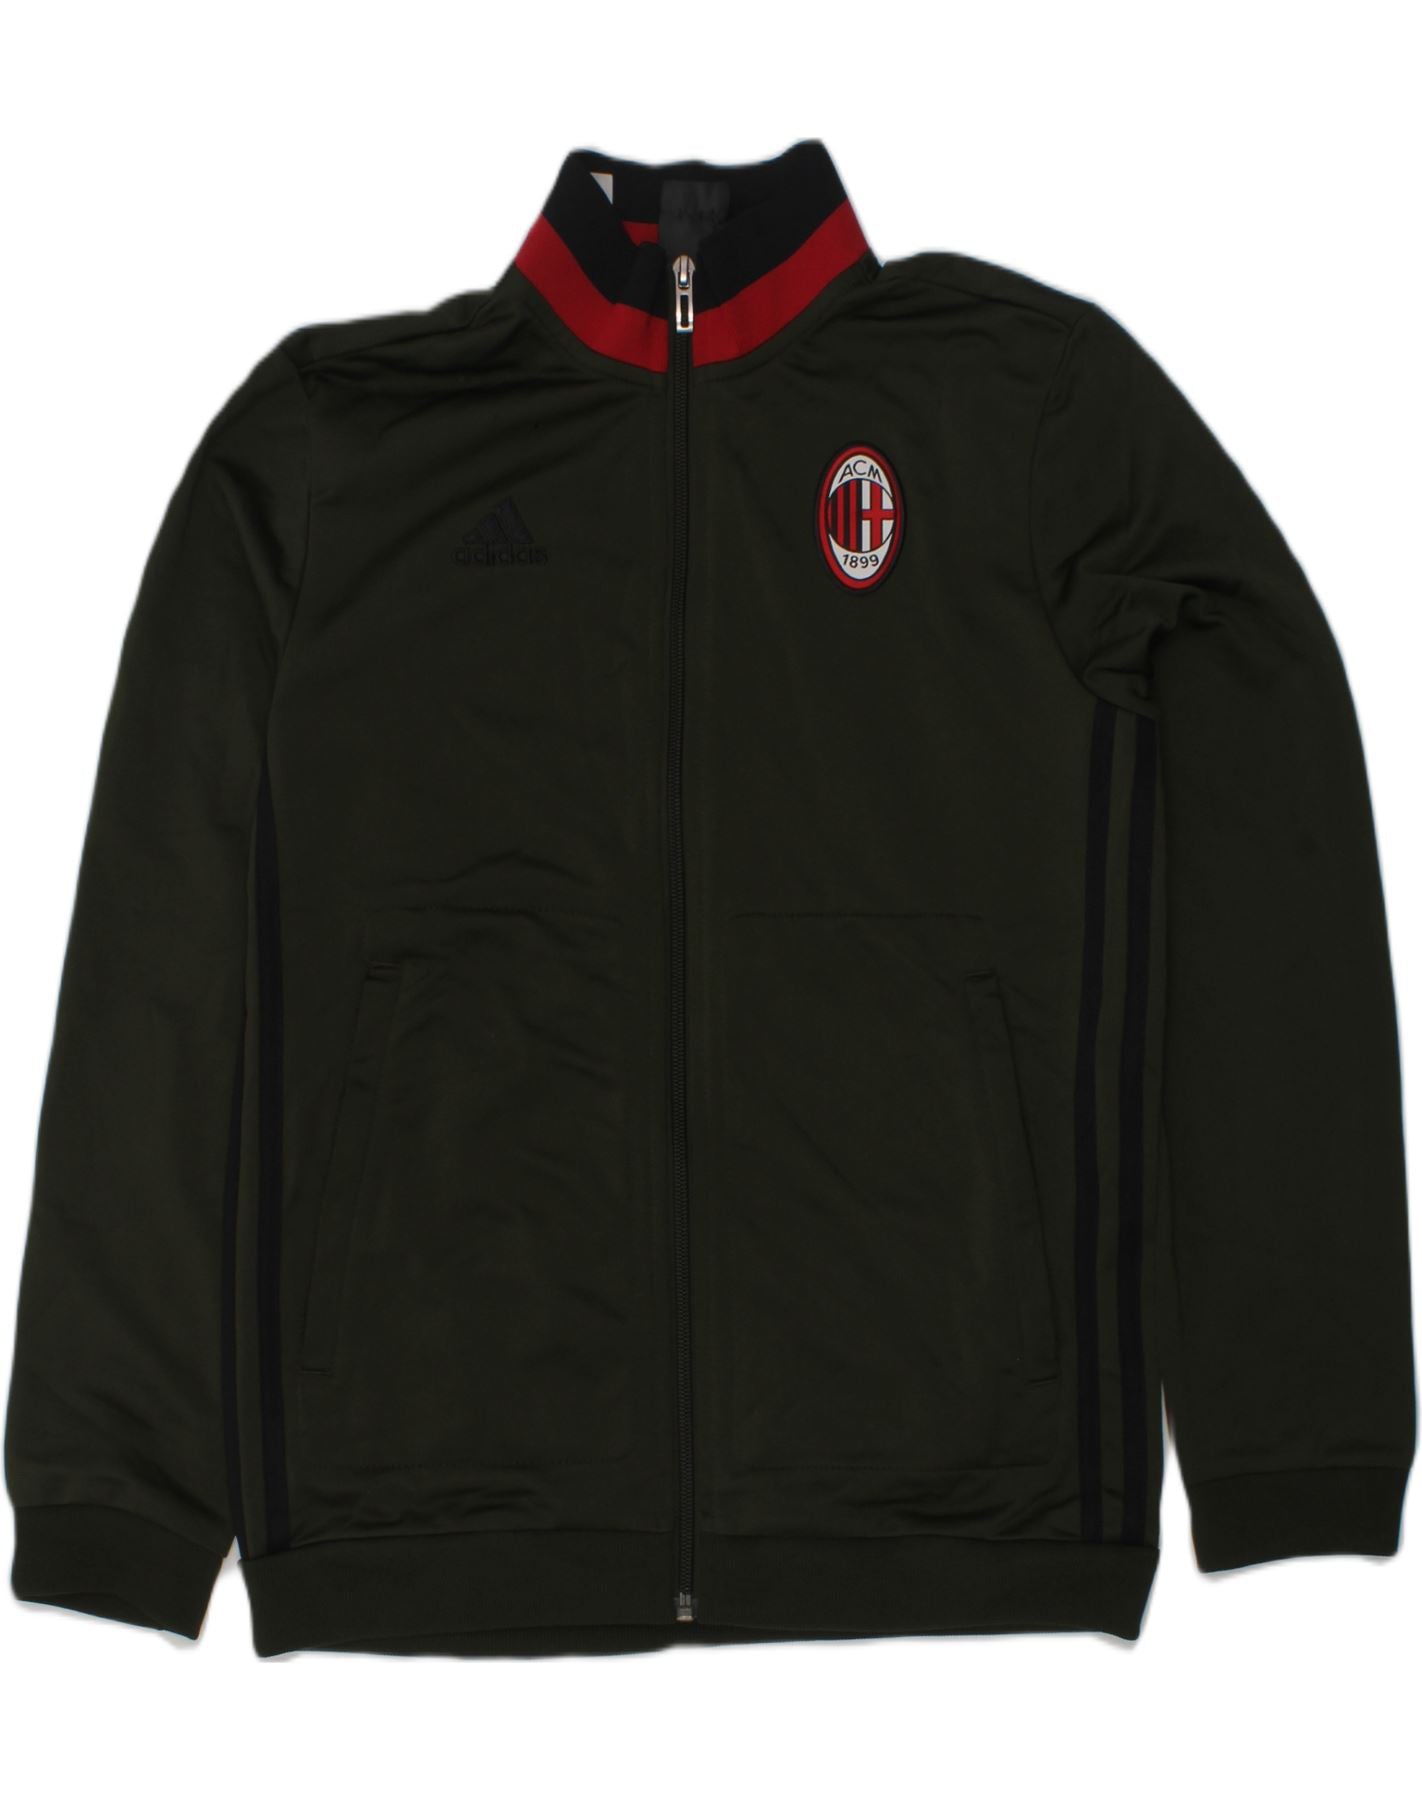 ADIDAS Boys AC Milan Graphic Tracksuit Top Jacket 11-12 Years Khaki, Vintage & Second-Hand Clothing Online